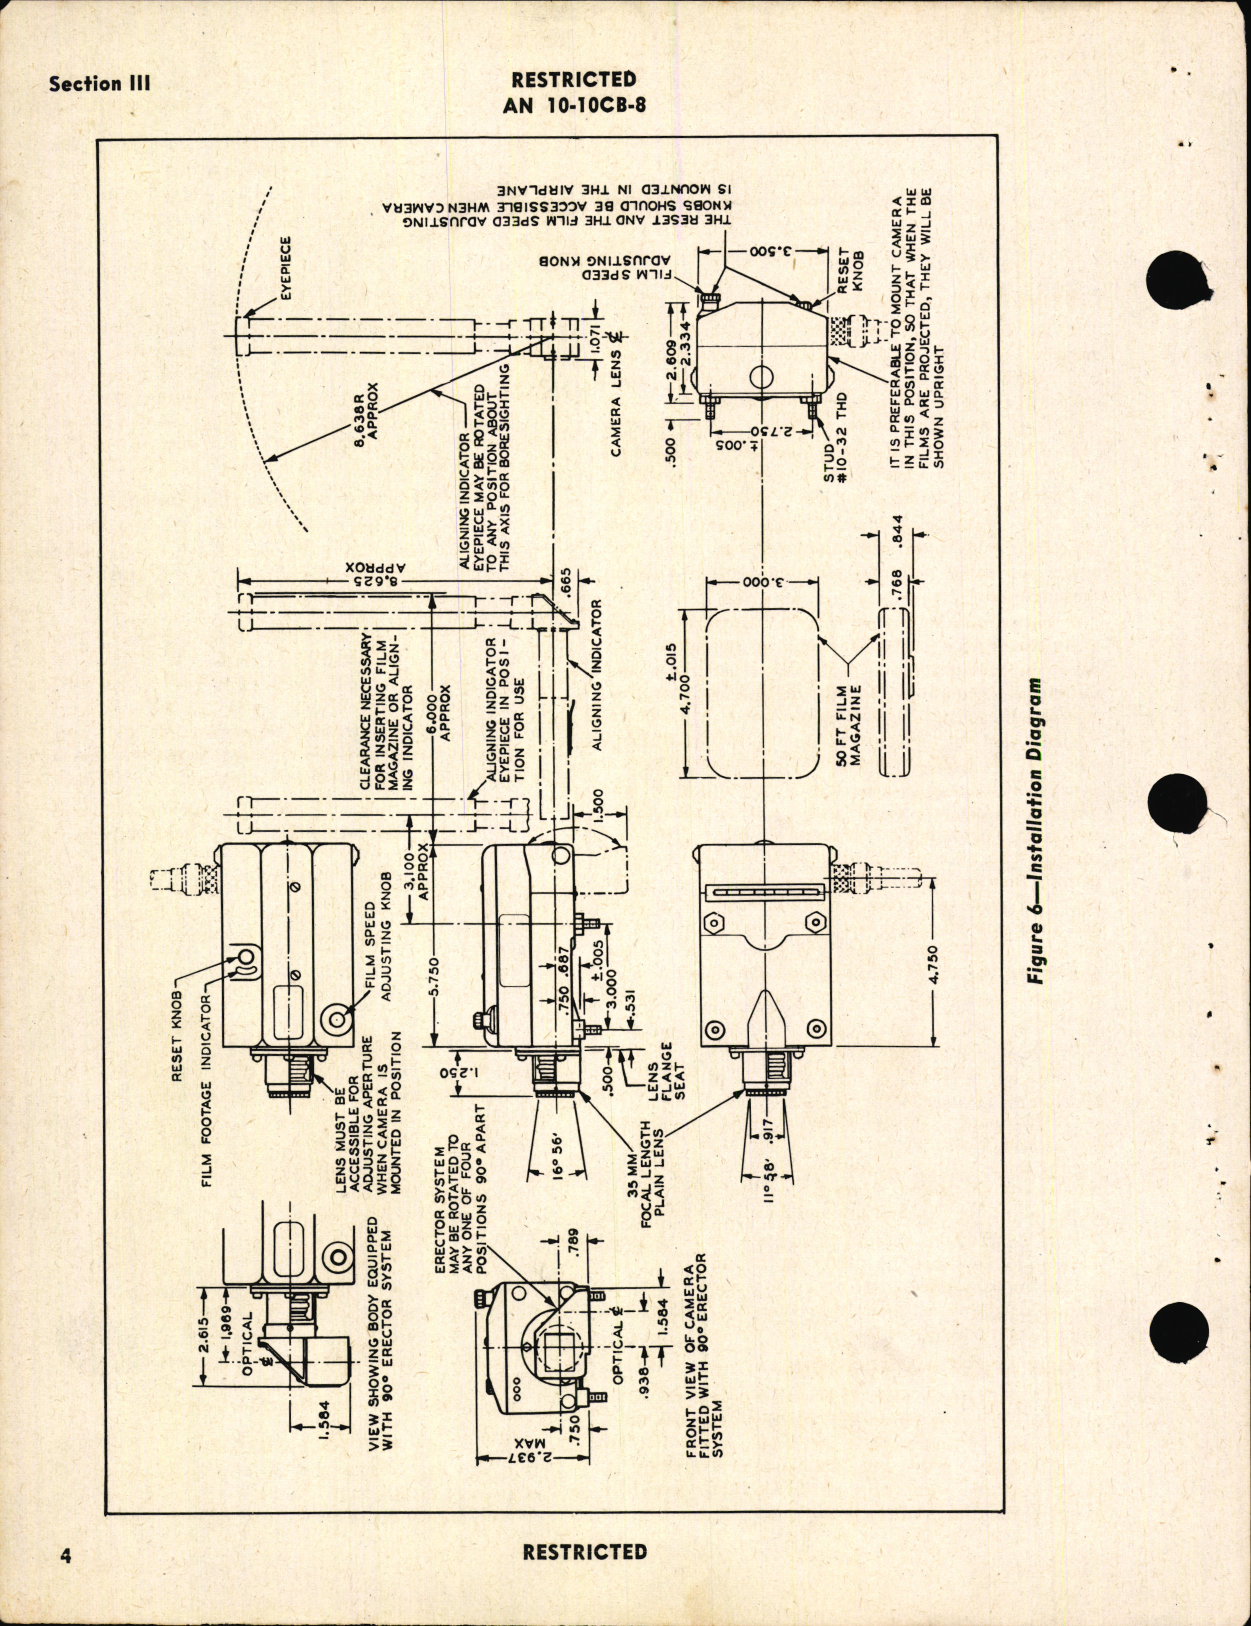 Sample page 8 from AirCorps Library document: Handbook of Instructions with Parts Catalog for N-6 and AN-N6 Gun Cameras